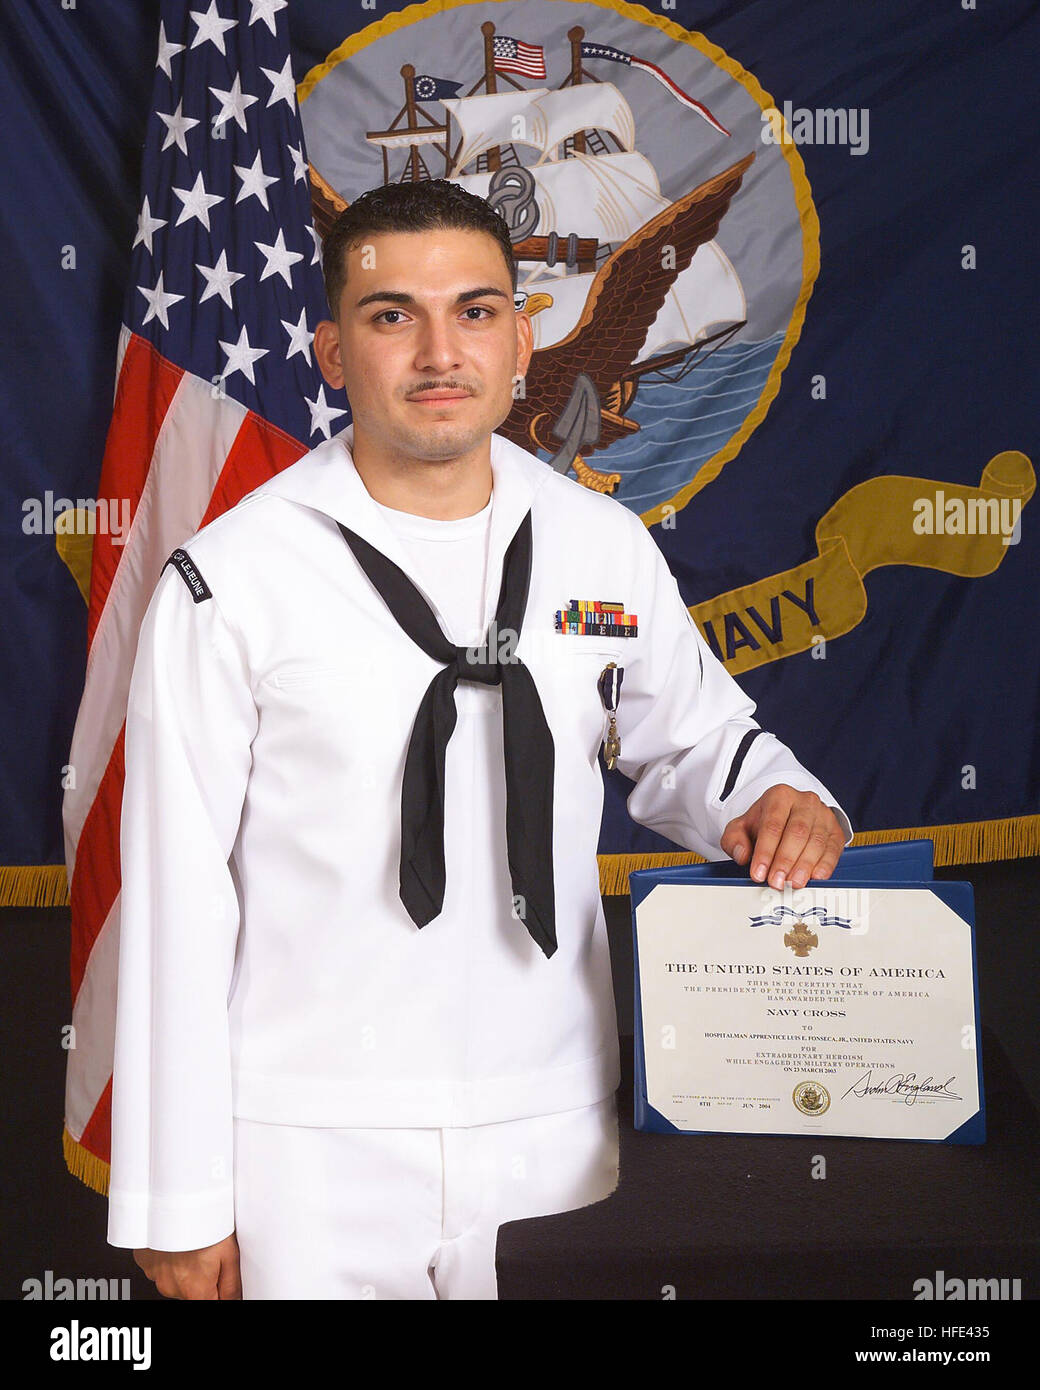 040811-N-0000N-004 Camp Lejeune, N.C. (Aug. 11, 2004) – Hospitalman Apprentice Luis E. Fonseca, Jr., stands with his Navy Cross citation that was presented to him by the Secretary of the Navy Gordon R. England, for heroism during the battle of An Nasiriyah, Iraq, in March 2003. Under attack and without concern of his own safety, Hospitalman Apprentice Fonseca braved small arms, machine gun, and intense rocket-propelled grenade fire to evacuate wounded Marines from a burning amphibious assault vehicle. He stabilized two casualties with lower limb amputations with tourniquets and administered mo Stock Photo